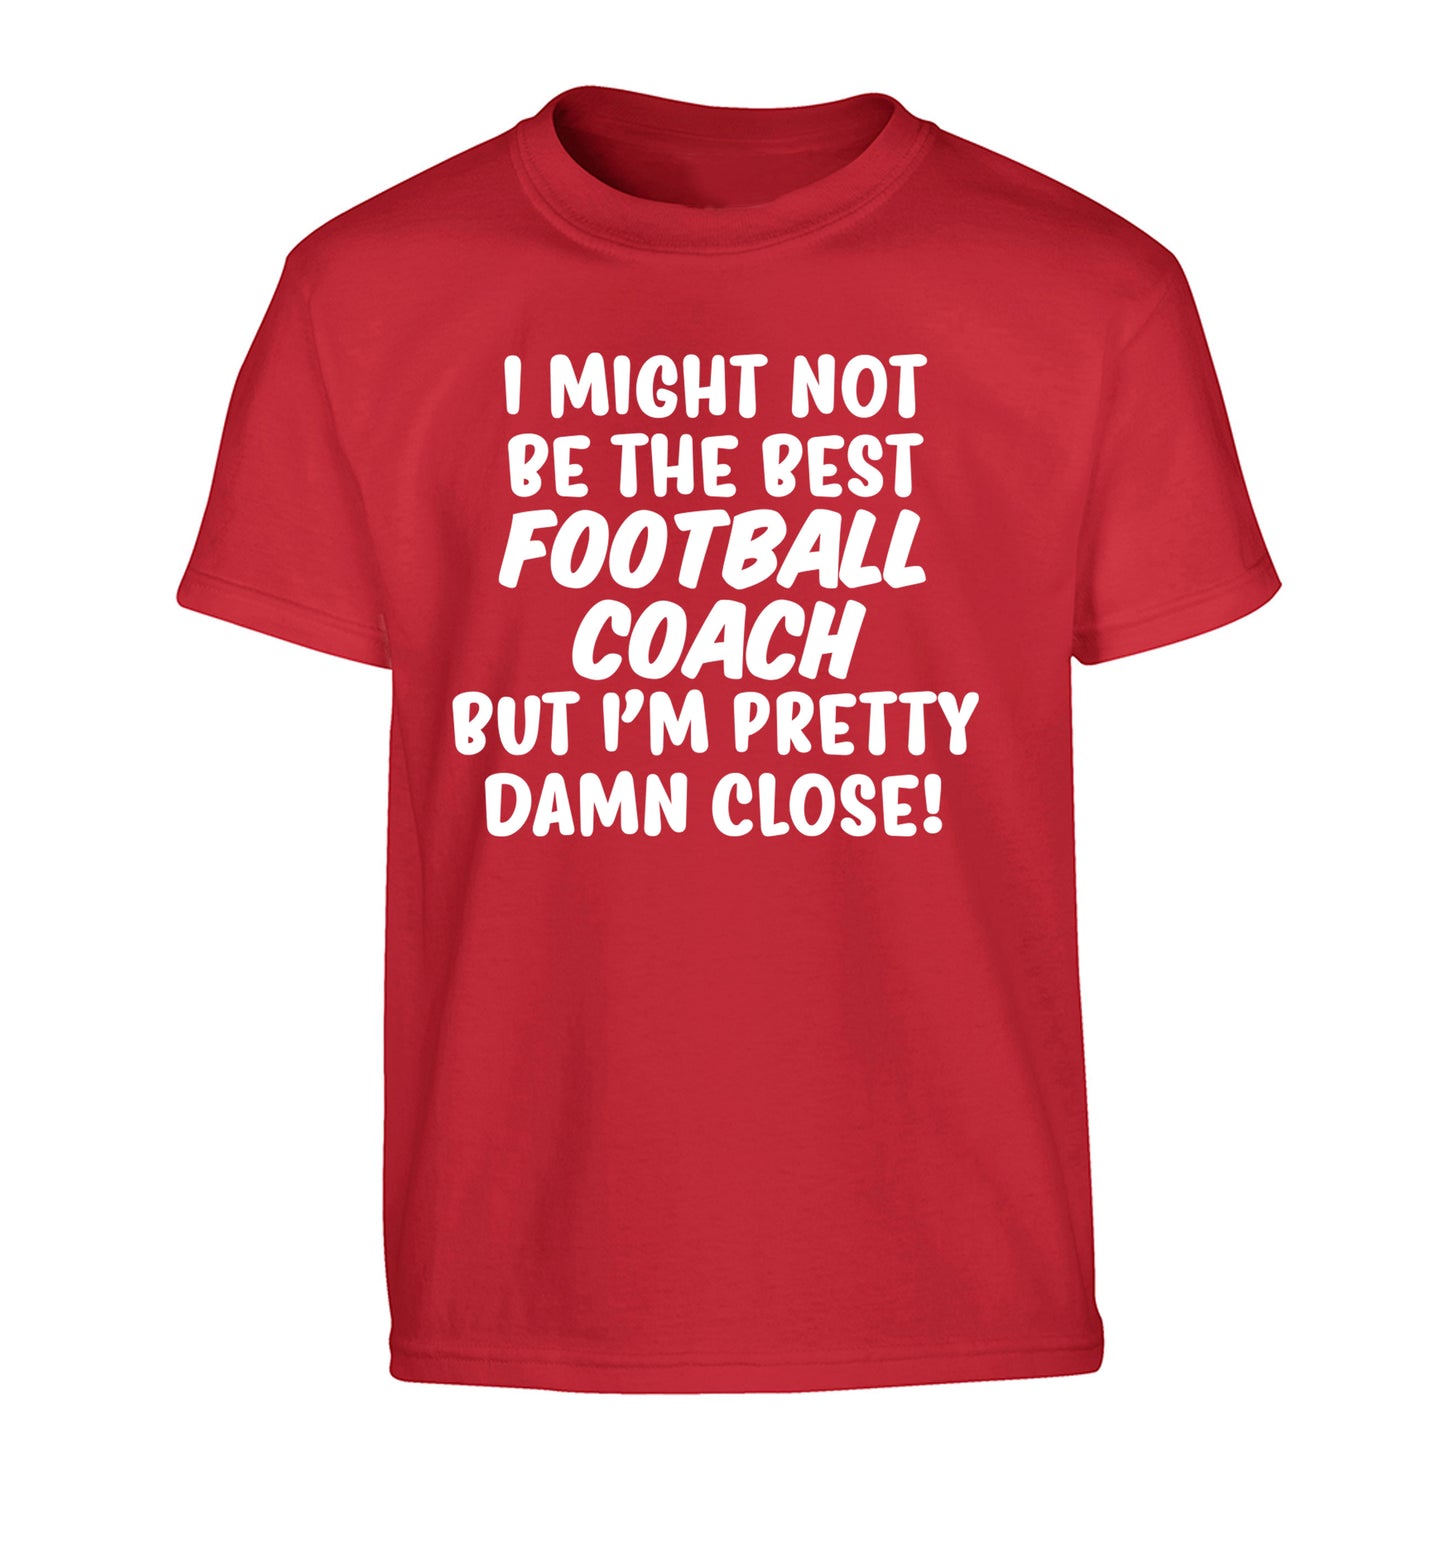 I might not be the best football coach but I'm pretty close! Children's red Tshirt 12-14 Years